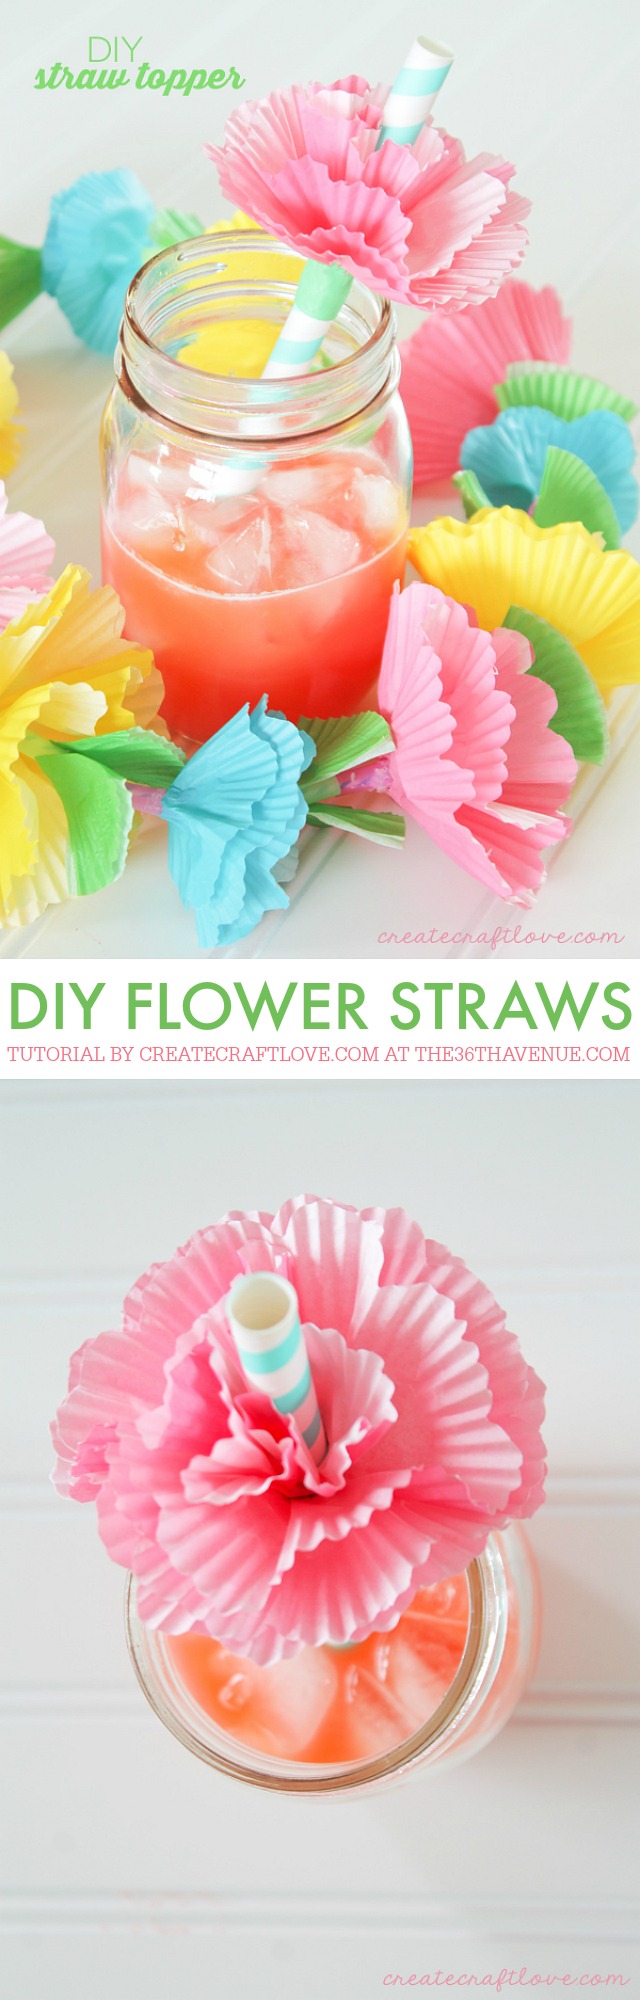 DIY Straw Toppers